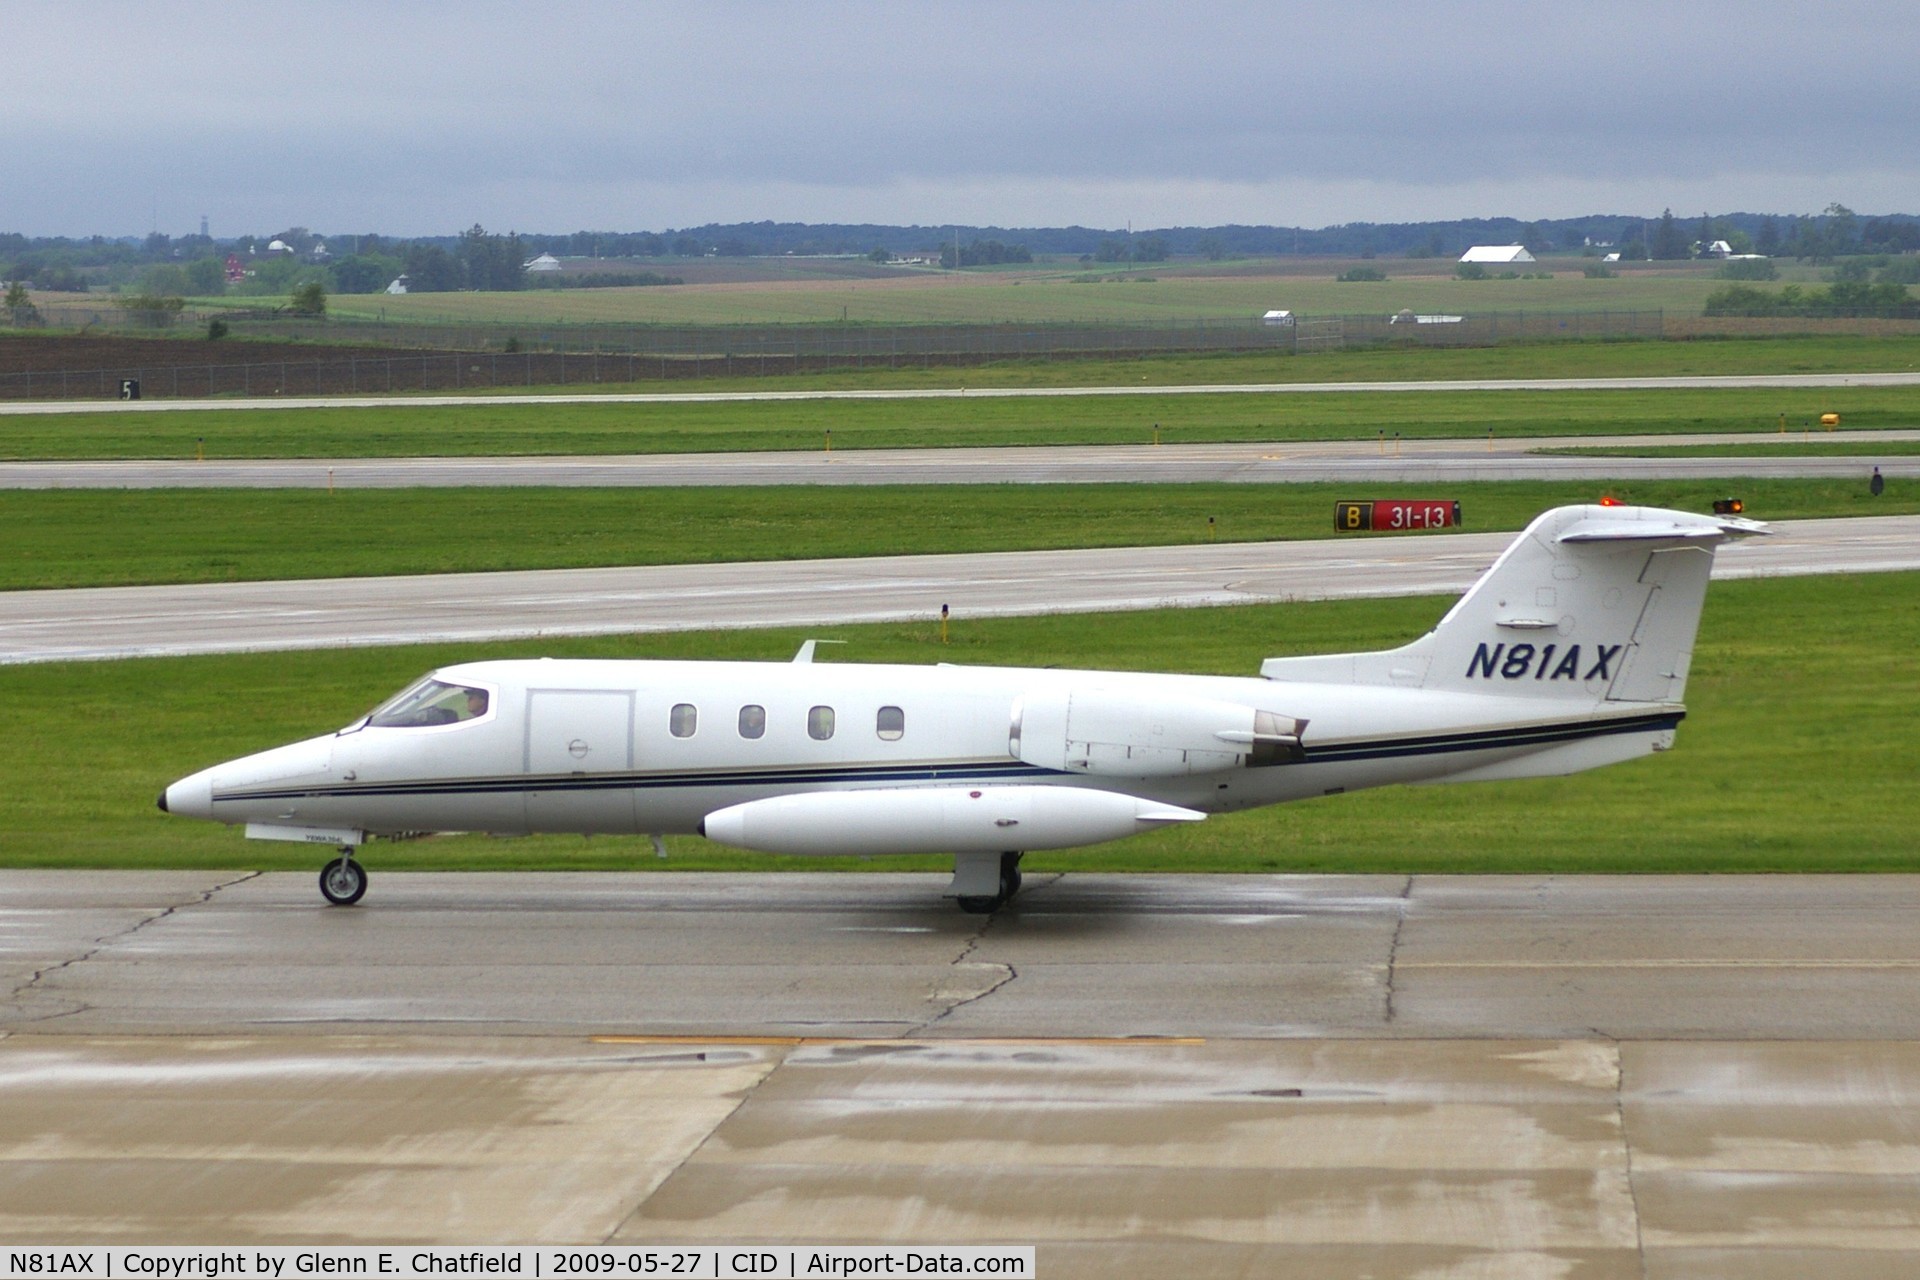 N81AX, 1979 Gates Learjet 25D C/N 279, Lifeguard 81AX taxiing from Landmark to runway 27